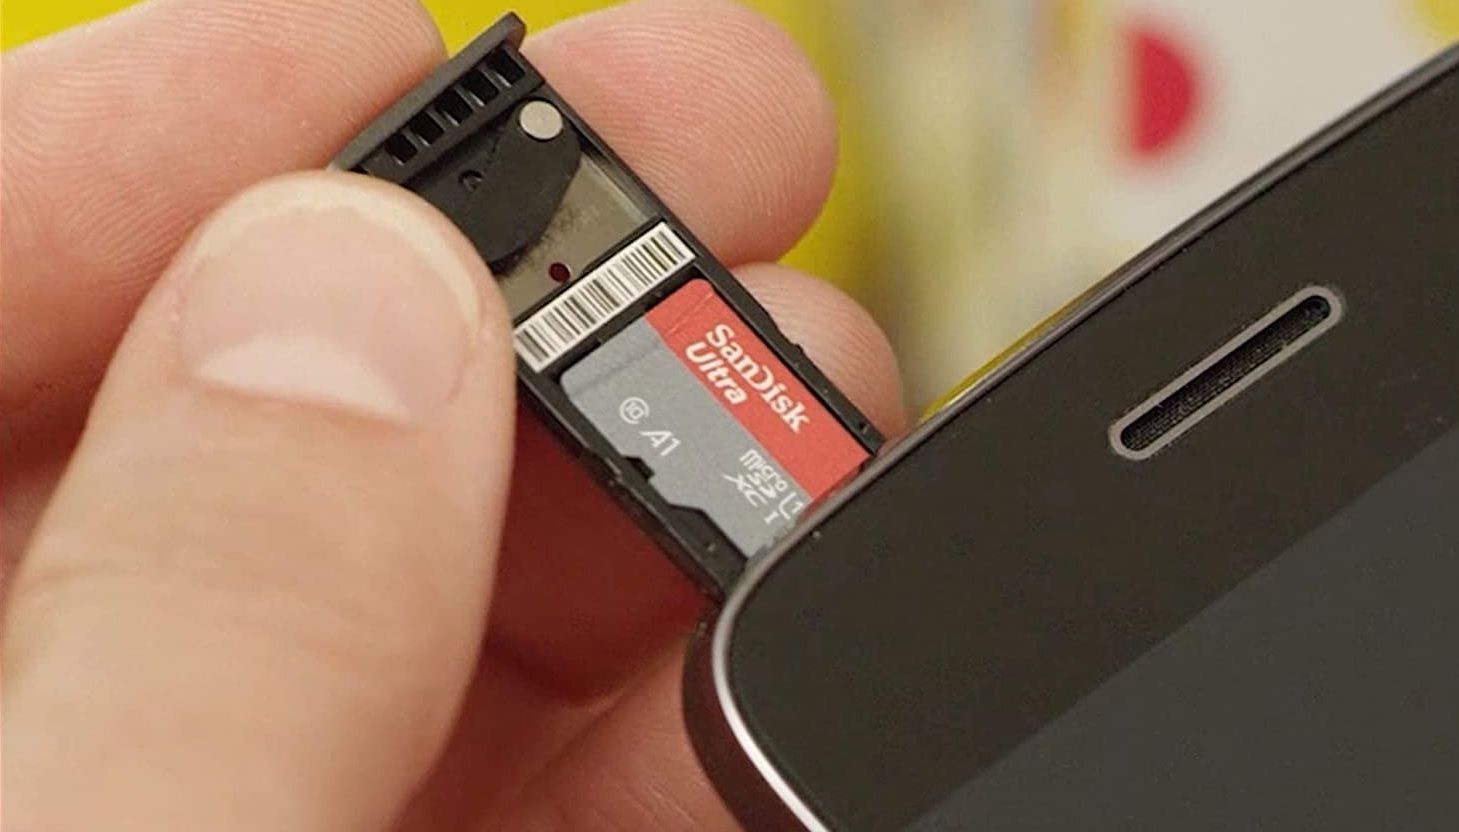 sandisk ultra being inserted into a phone